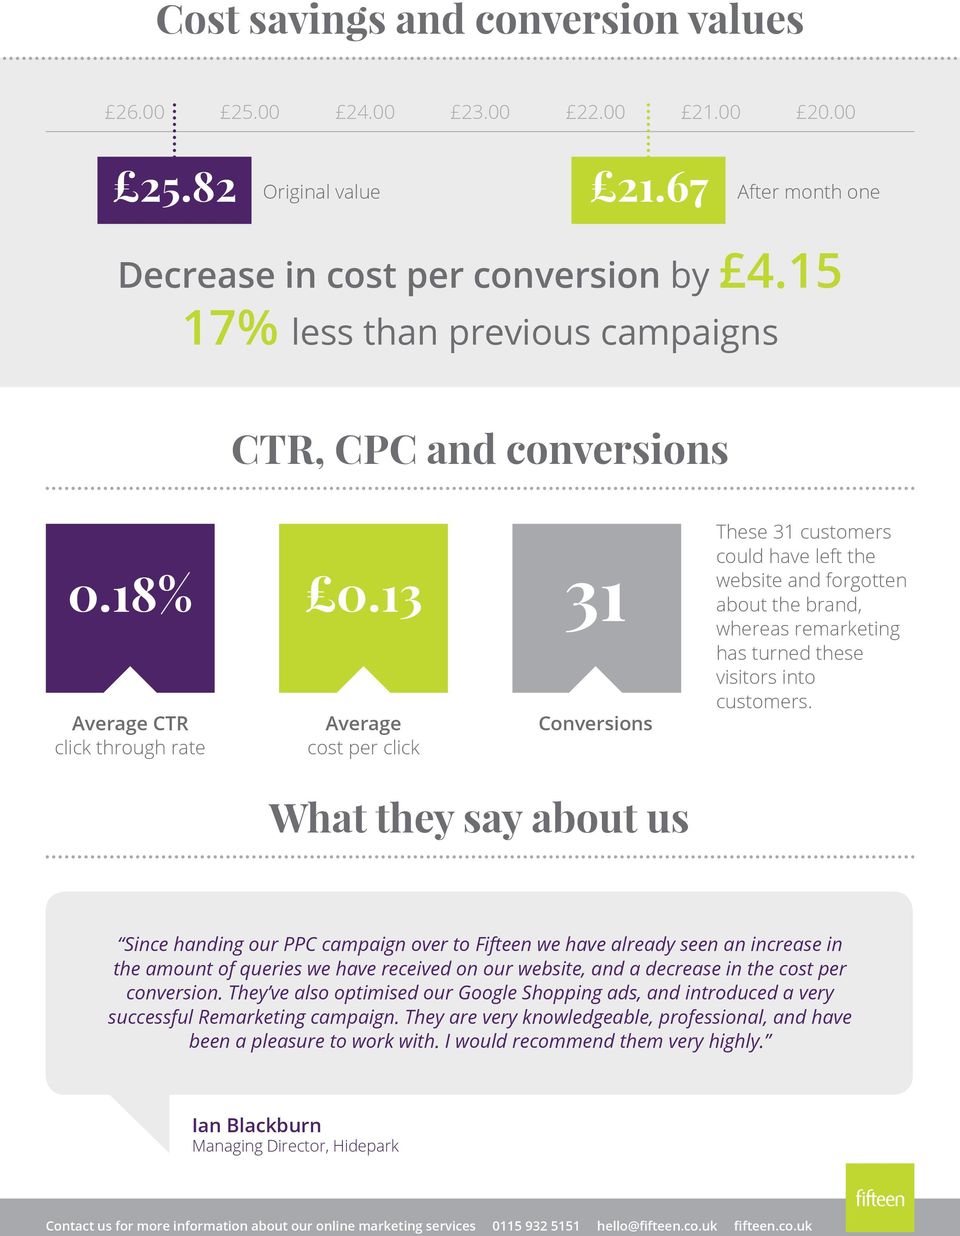 13 Average CTR click through rate Average cost per click 31 Conversions These 31 customers could have left the website and forgotten about the brand, whereas remarketing has turned these visitors